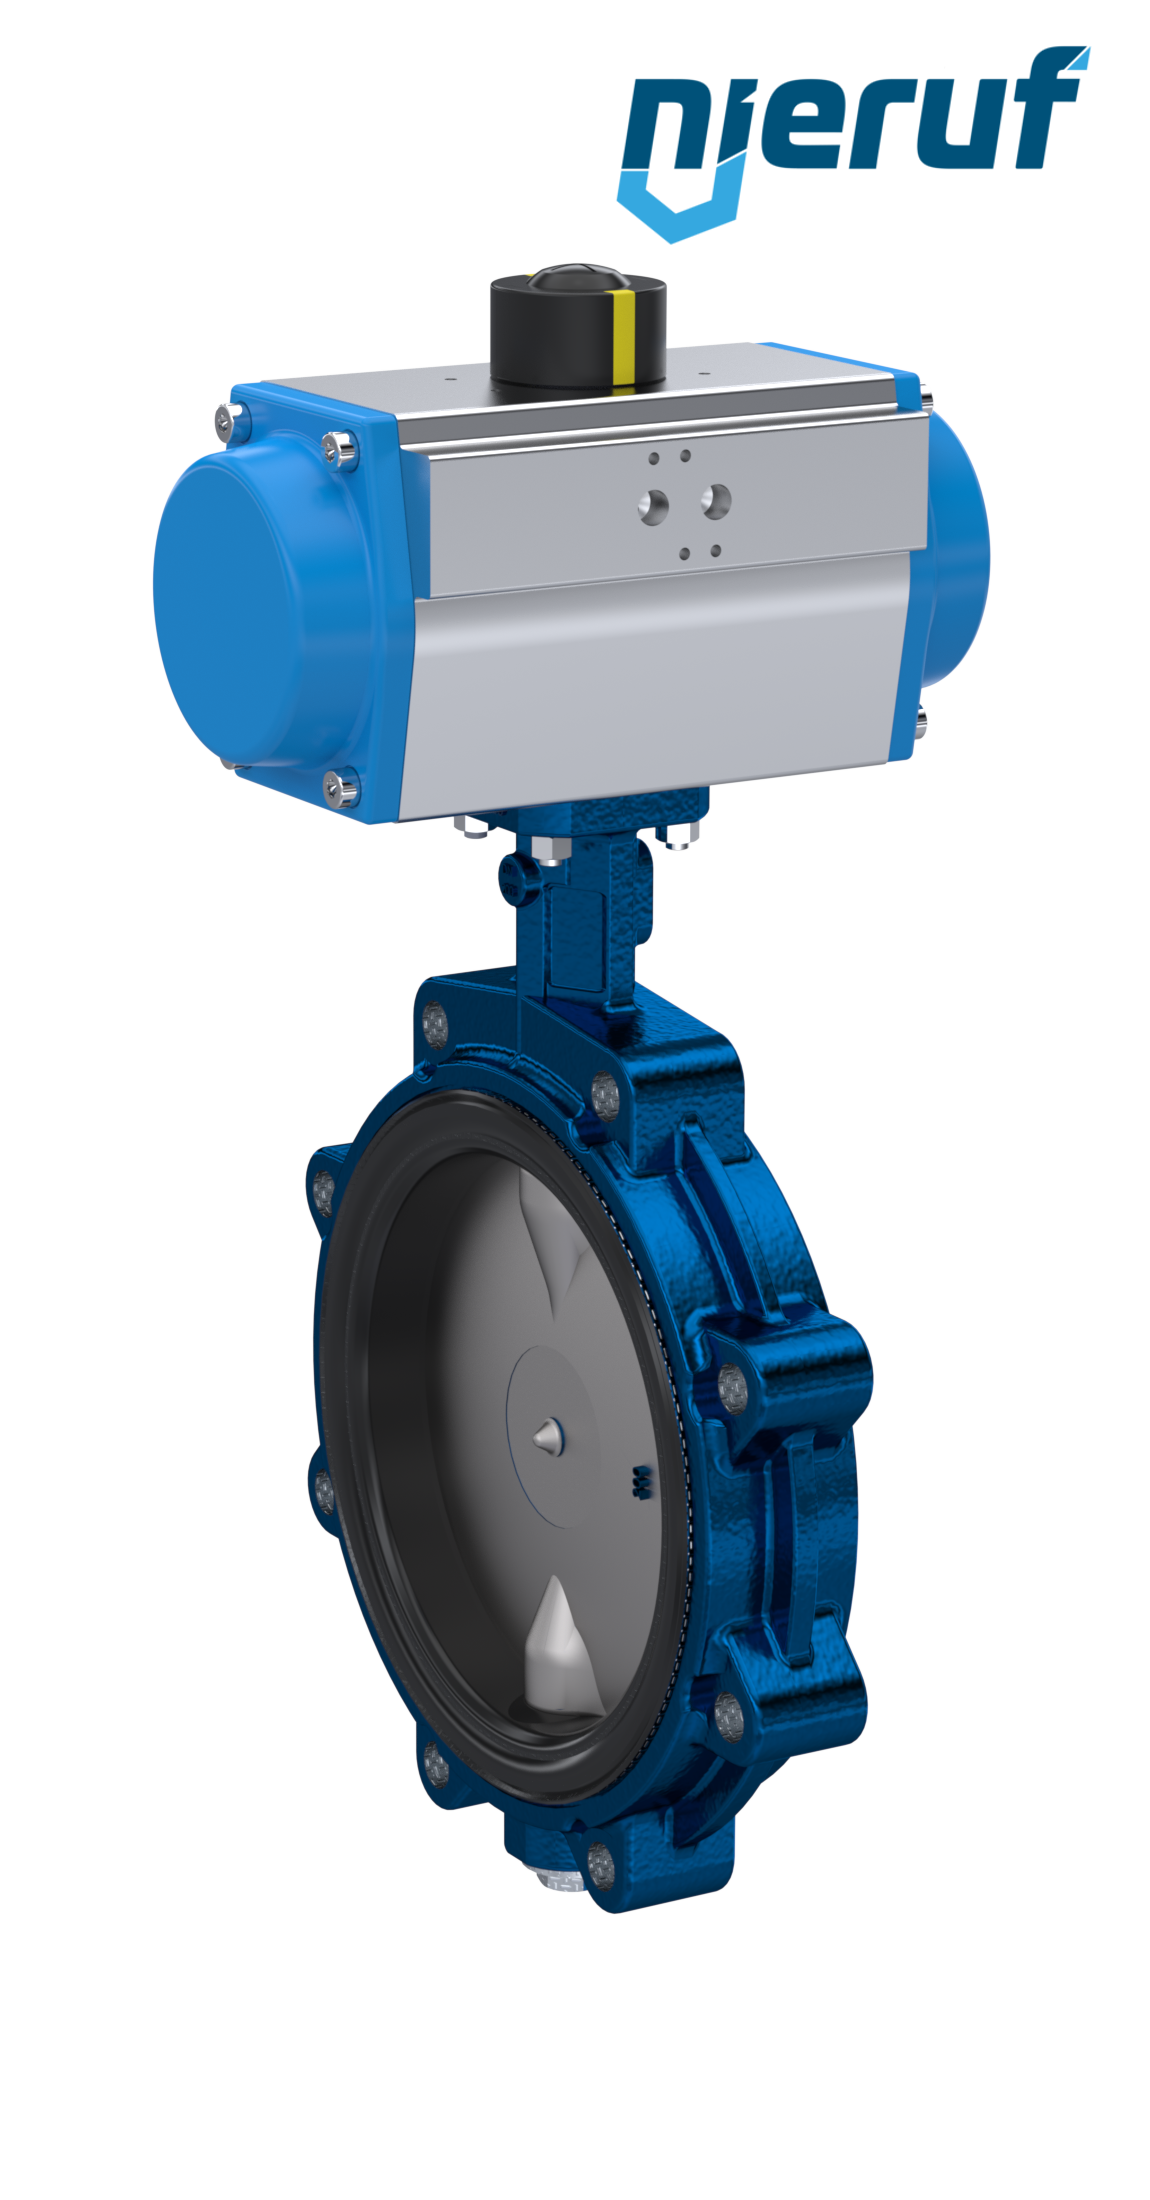 Butterfly valve DN 80 AK02 EPDM DVGW drinking water, WRAS, ACS, W270 pneumatic actuator double acting